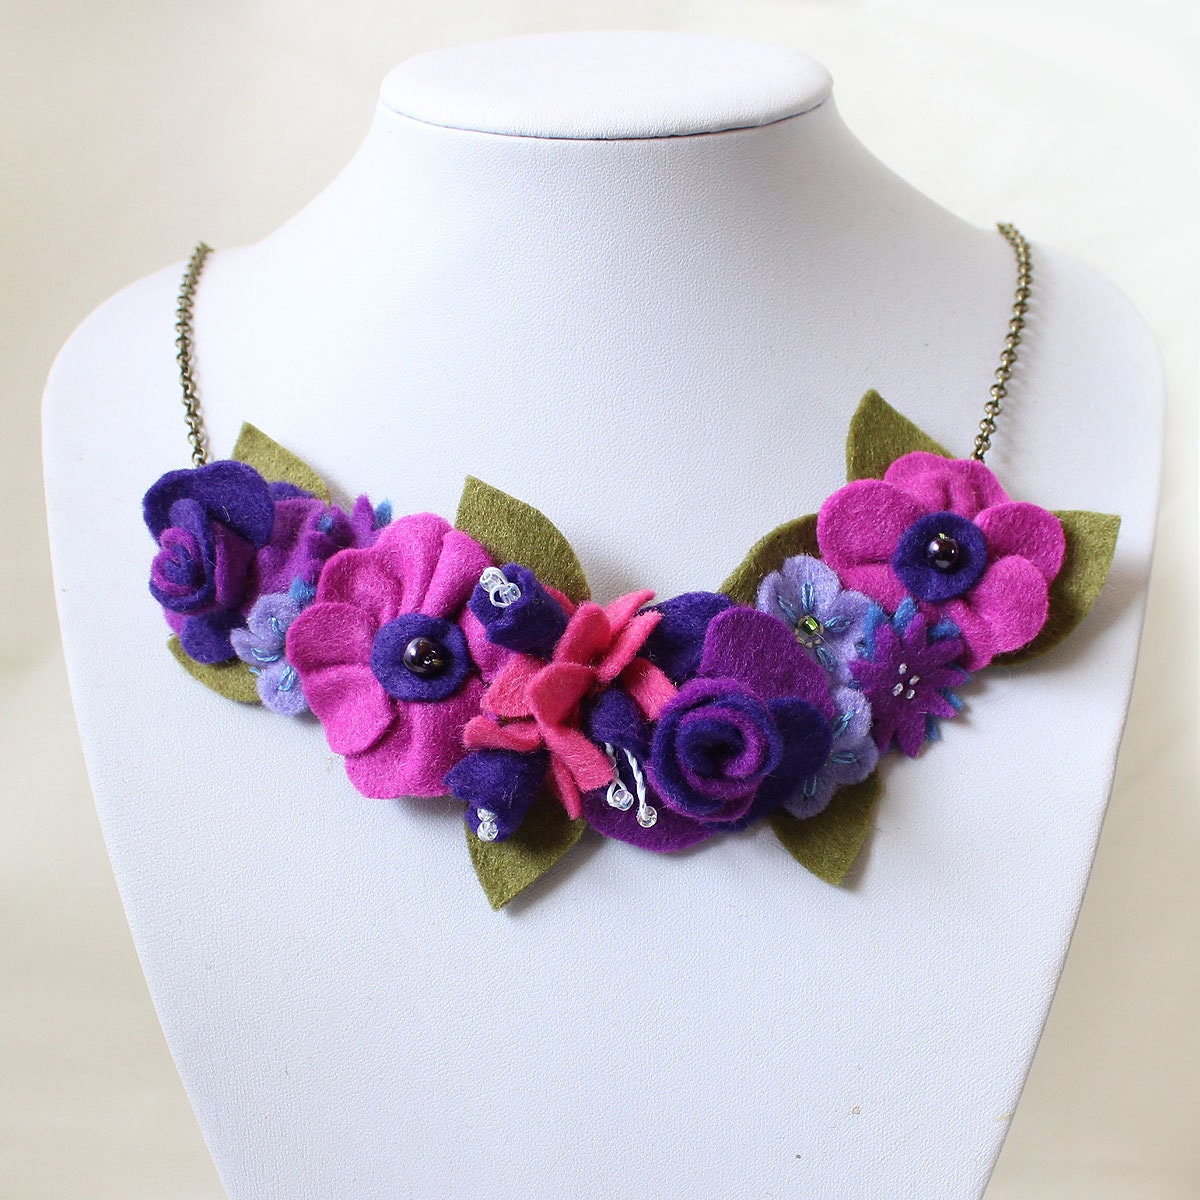 Felt Flowers Statement Necklace, Large Bright Pink & Purple Floral Necklace With Fuchsias, Roses, Forget-Me-Nots, Poppies Cornflowers